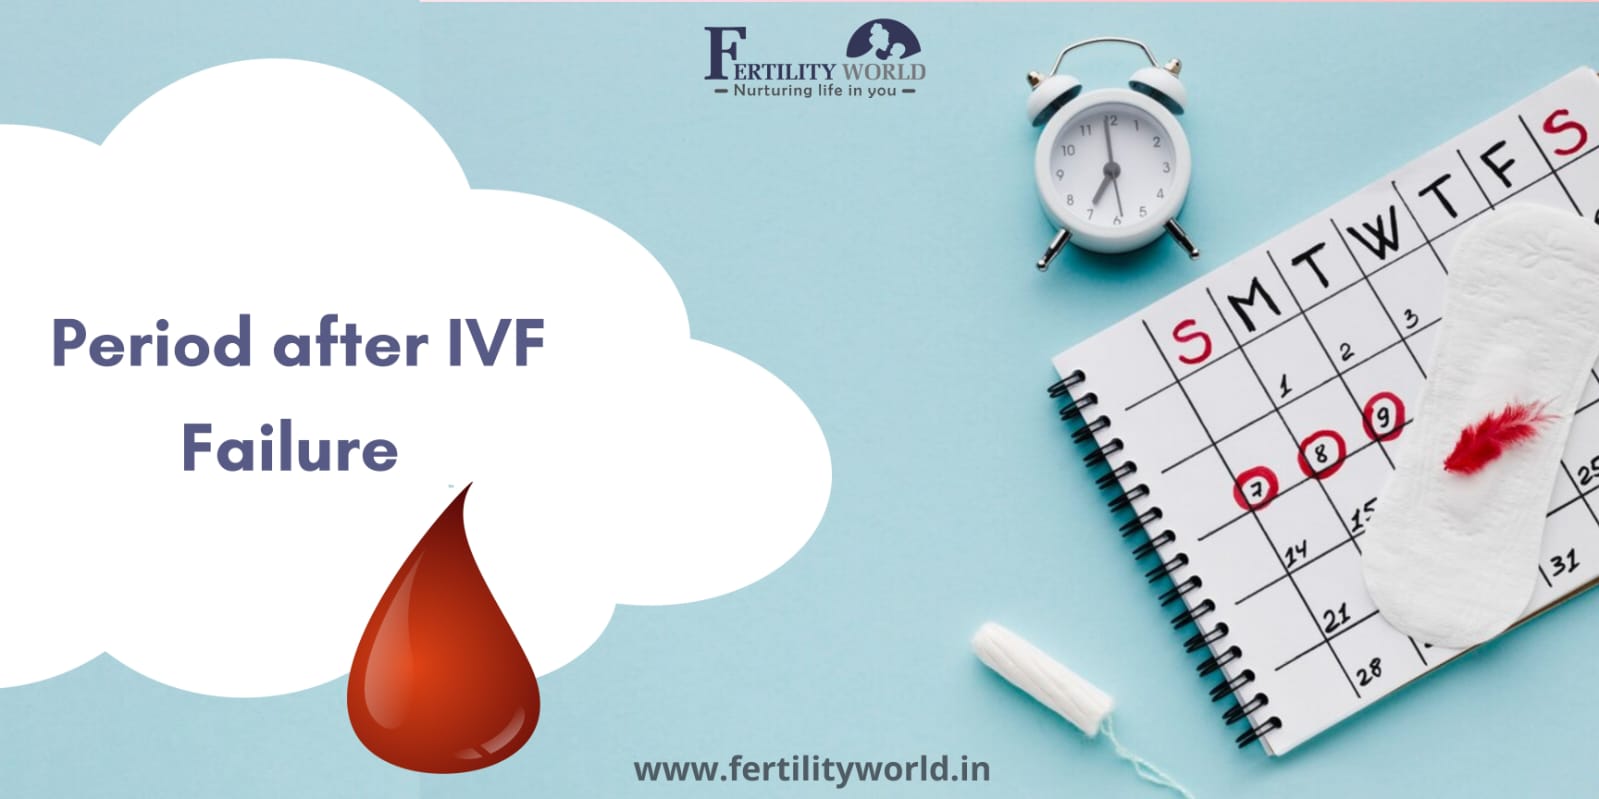 When to expect the period after failed IVF?